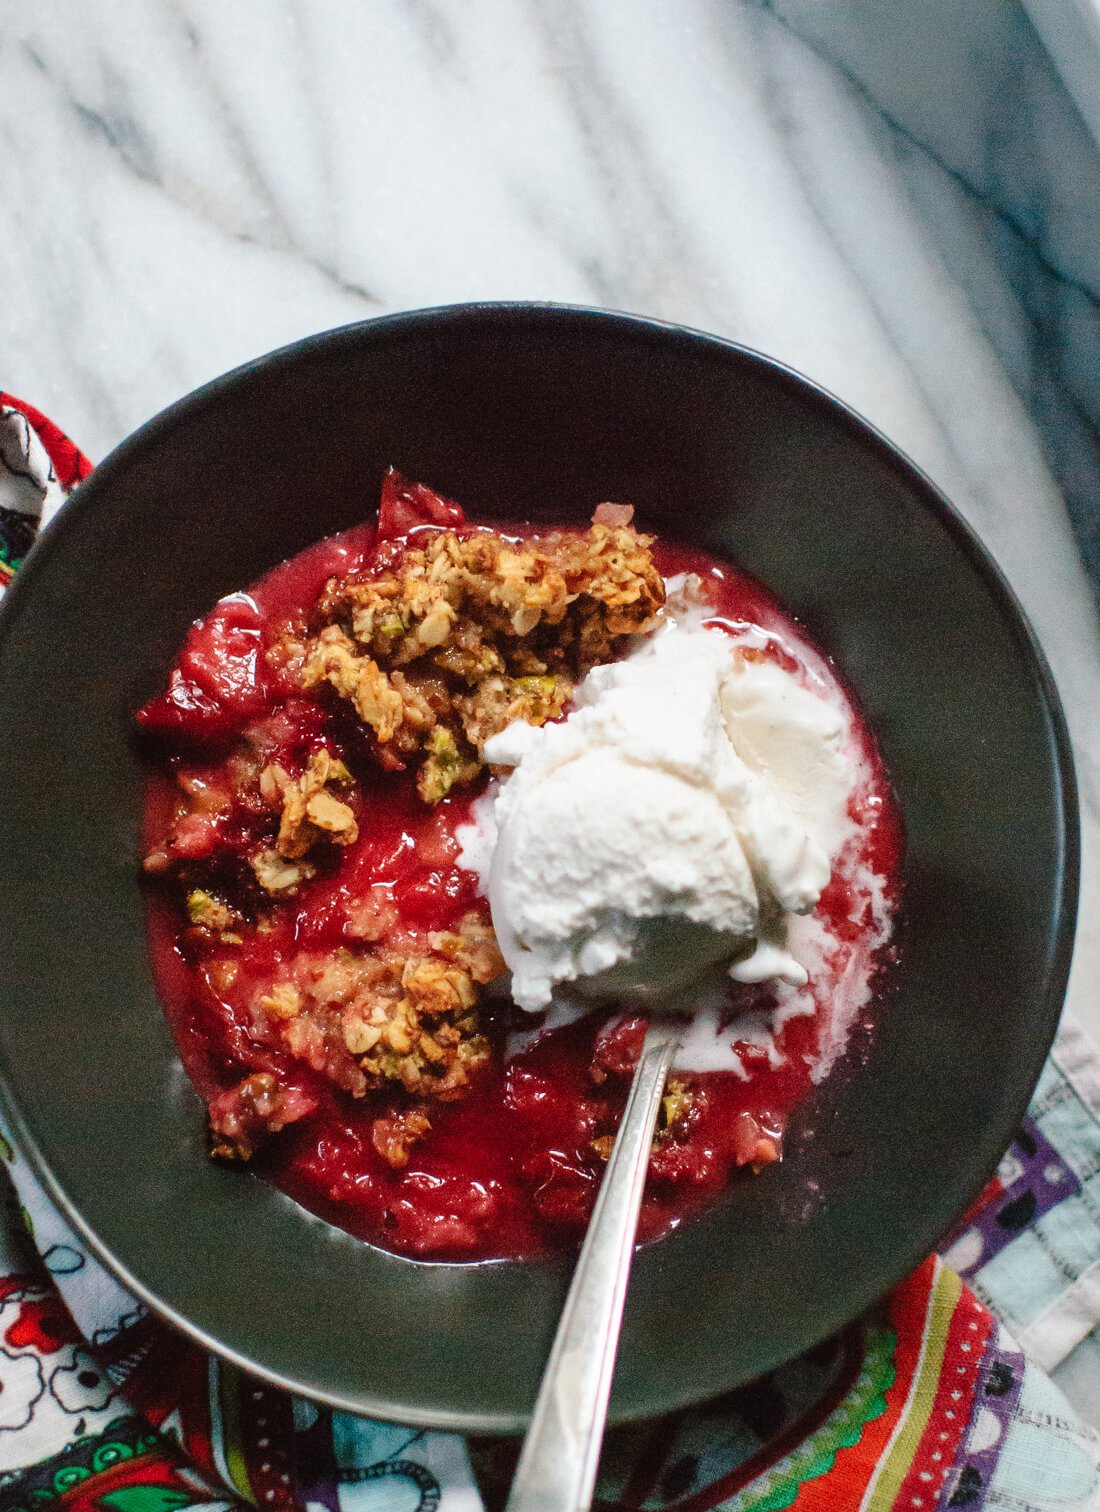 Simple, gluten-free plum crisp with a pistachio, oat and almond meal topping